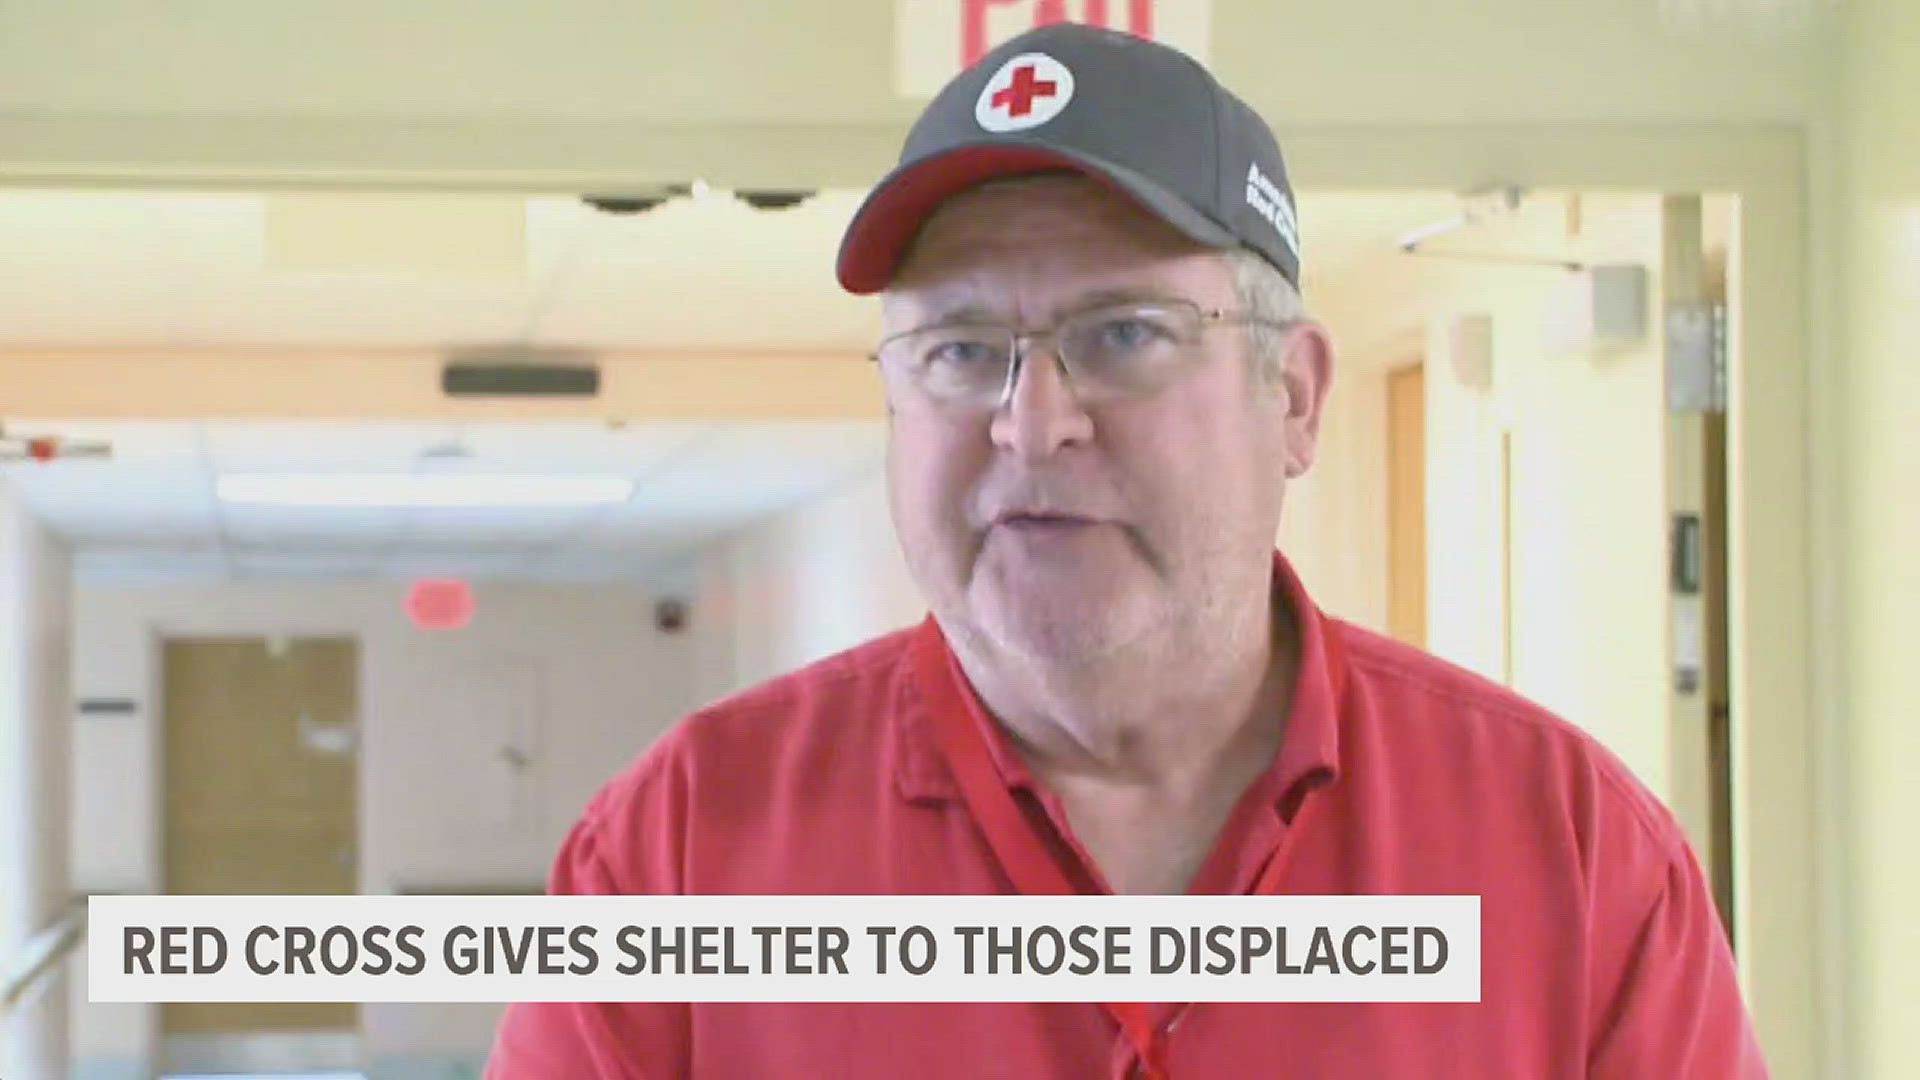 The shelter is located at the old Select Specialty Hospital at 1111 W. Kimberly Rd. in Davenport.